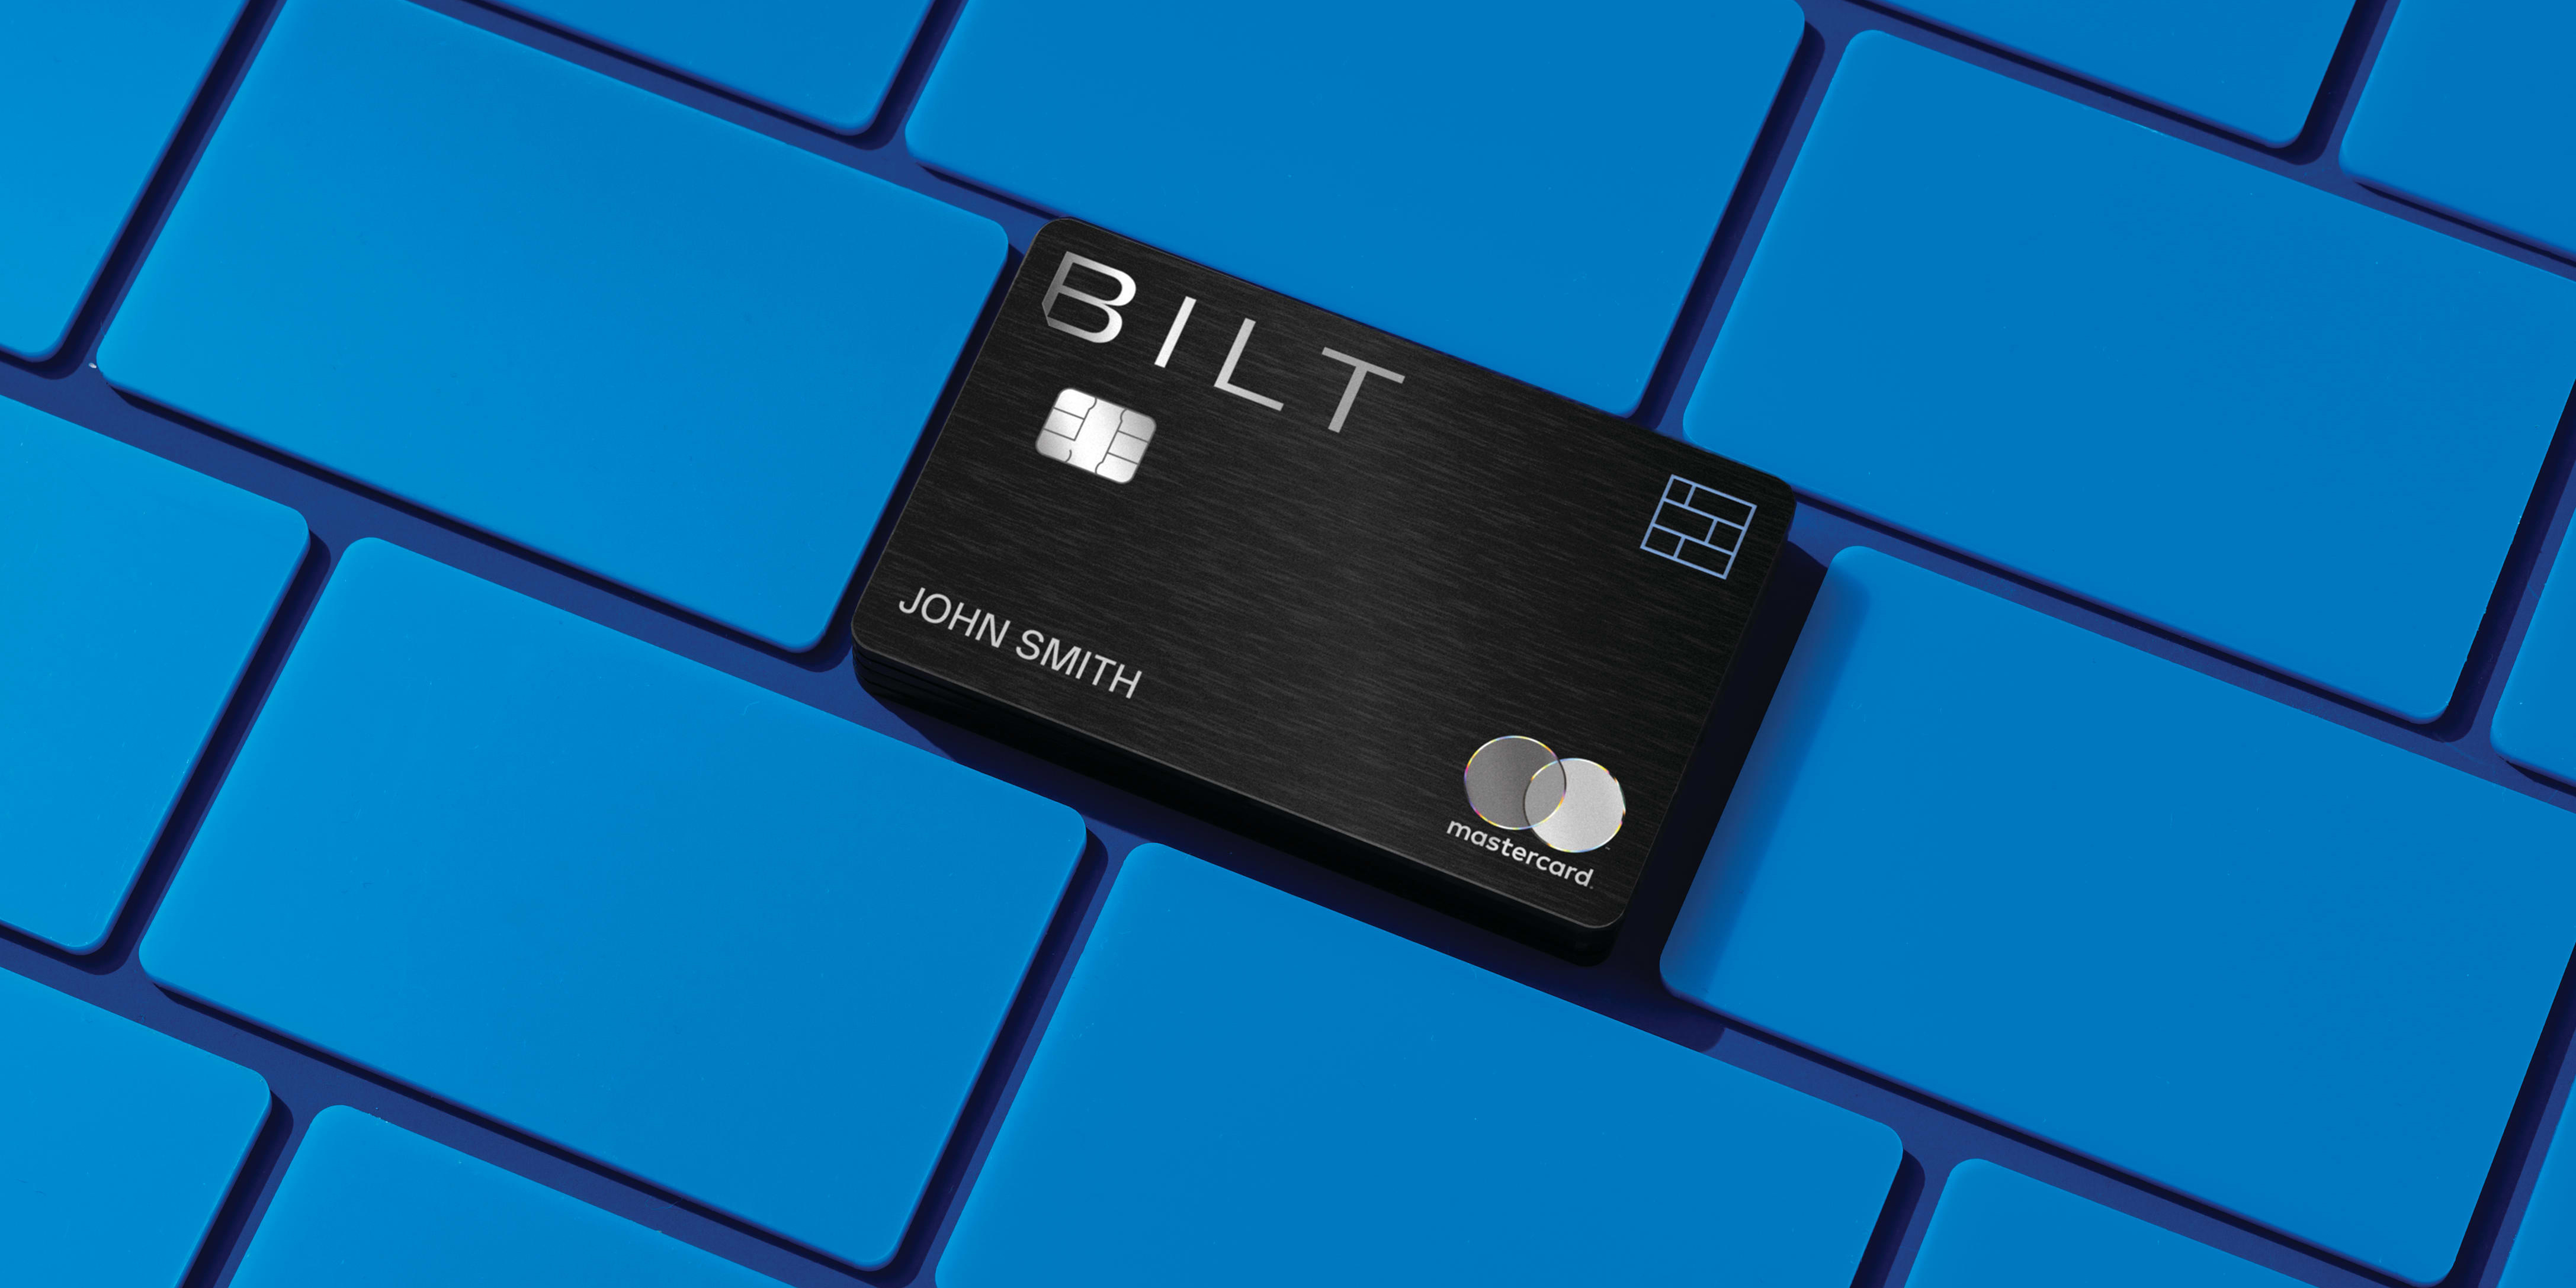 Bilt Rewards and Mastercard Team Up to Launch the Bilt Mastercard: The First Credit Card with No Fees on Rent Payments